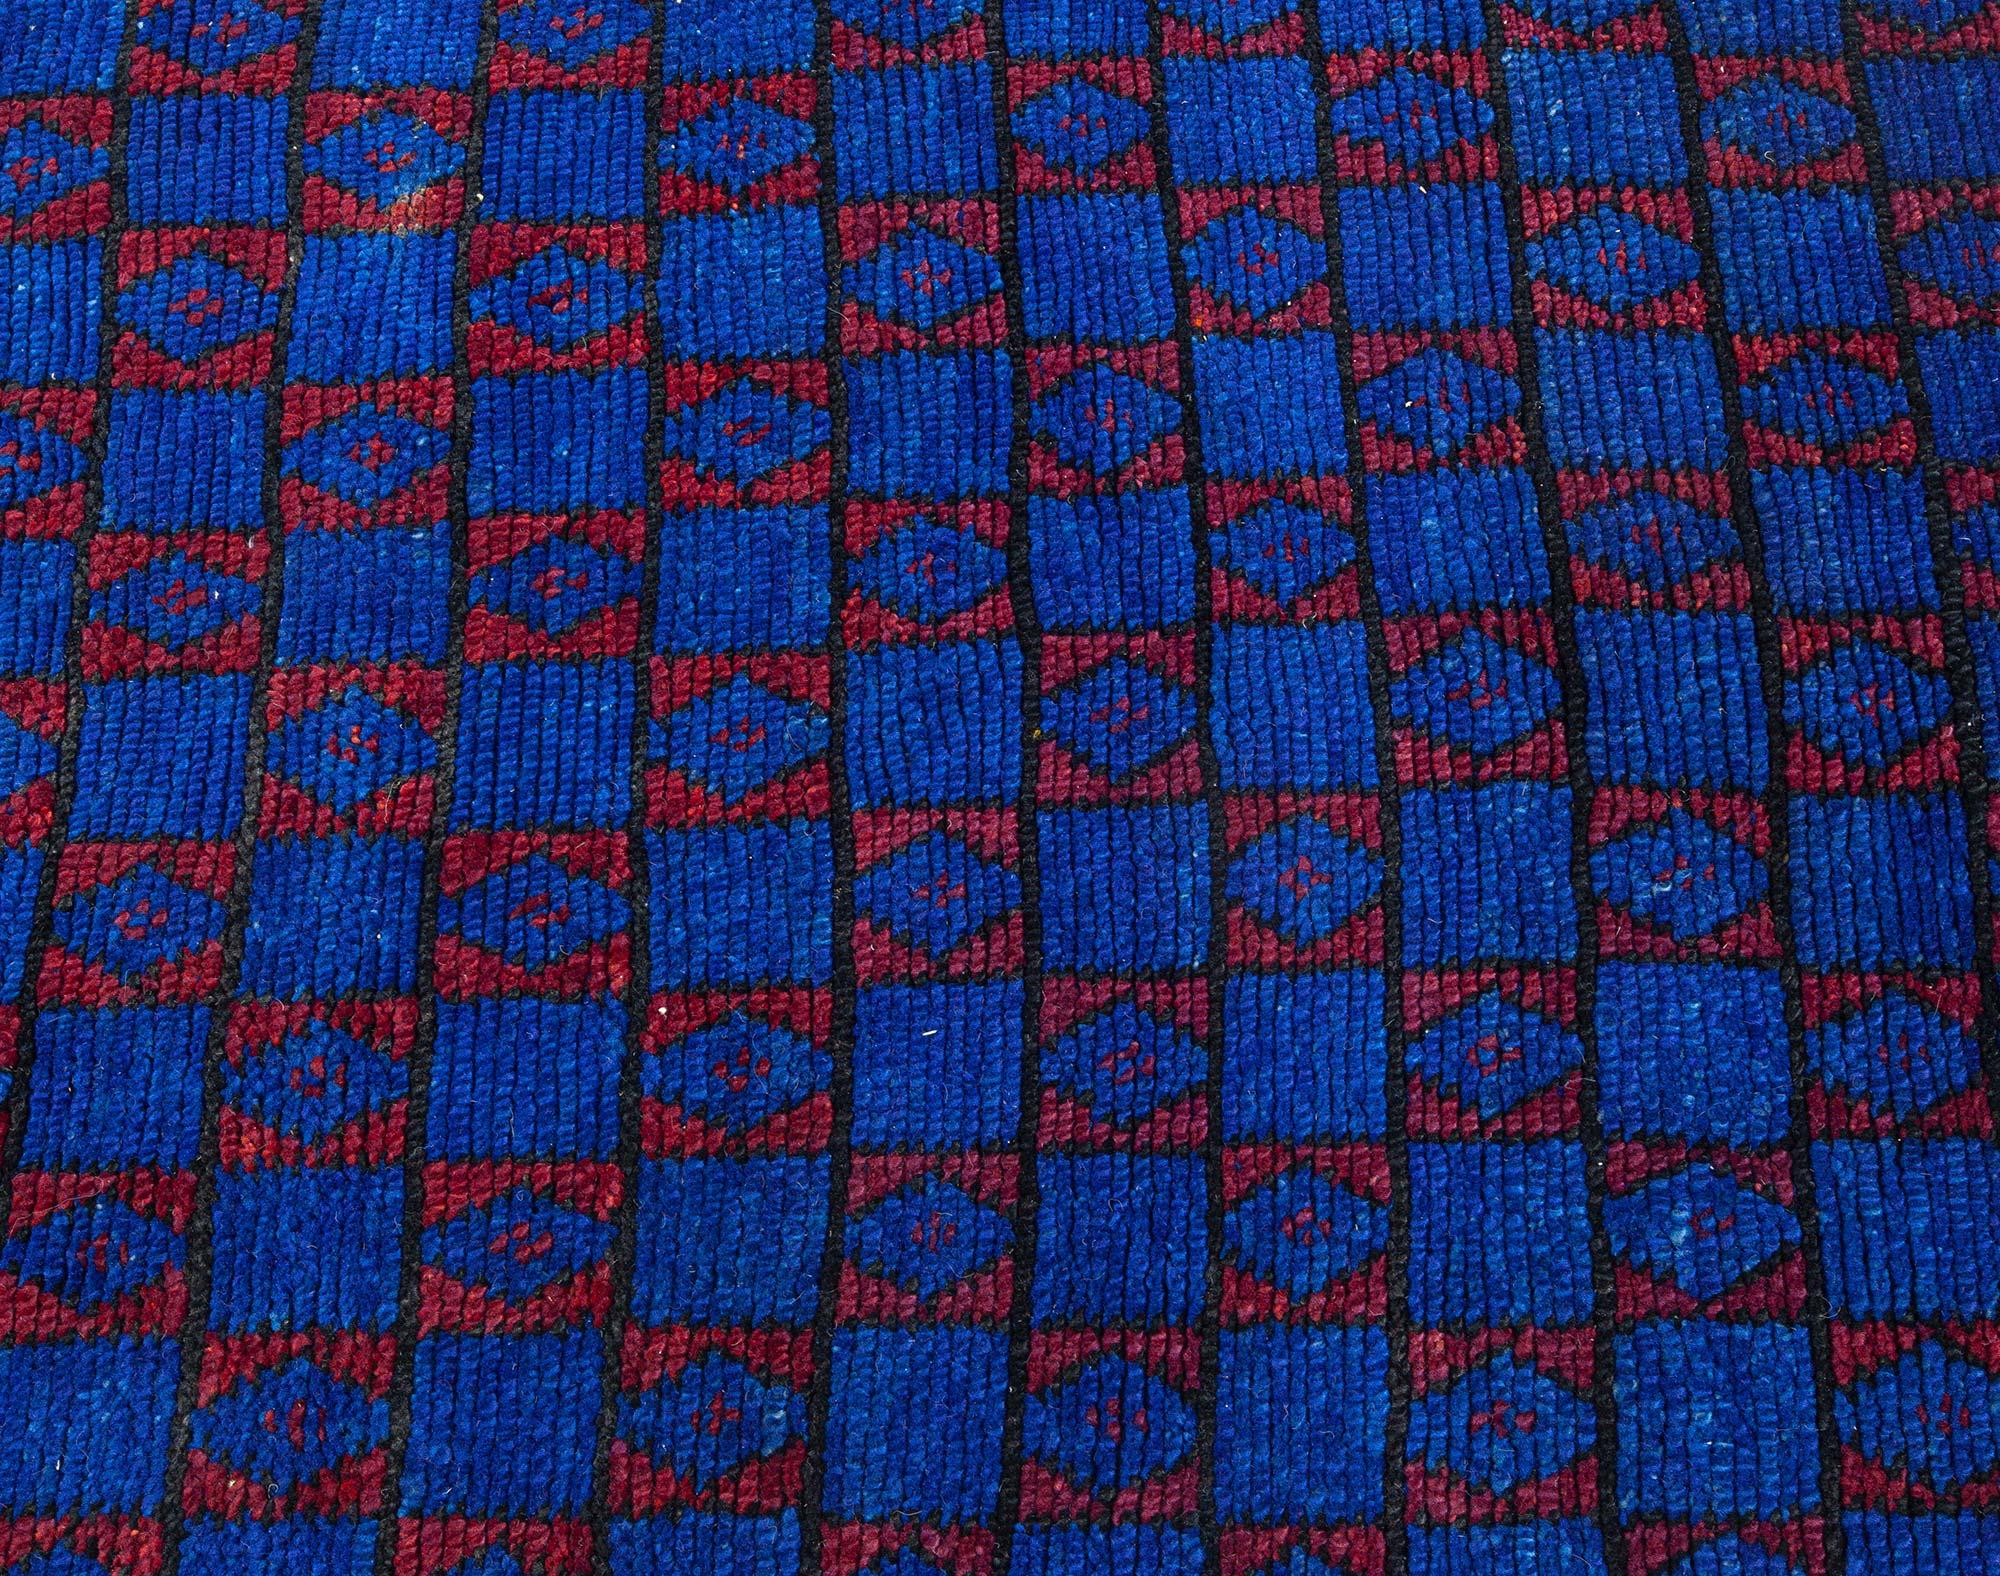 Vintage Geometric Blue Red Moroccan Rug
Size: 6'8